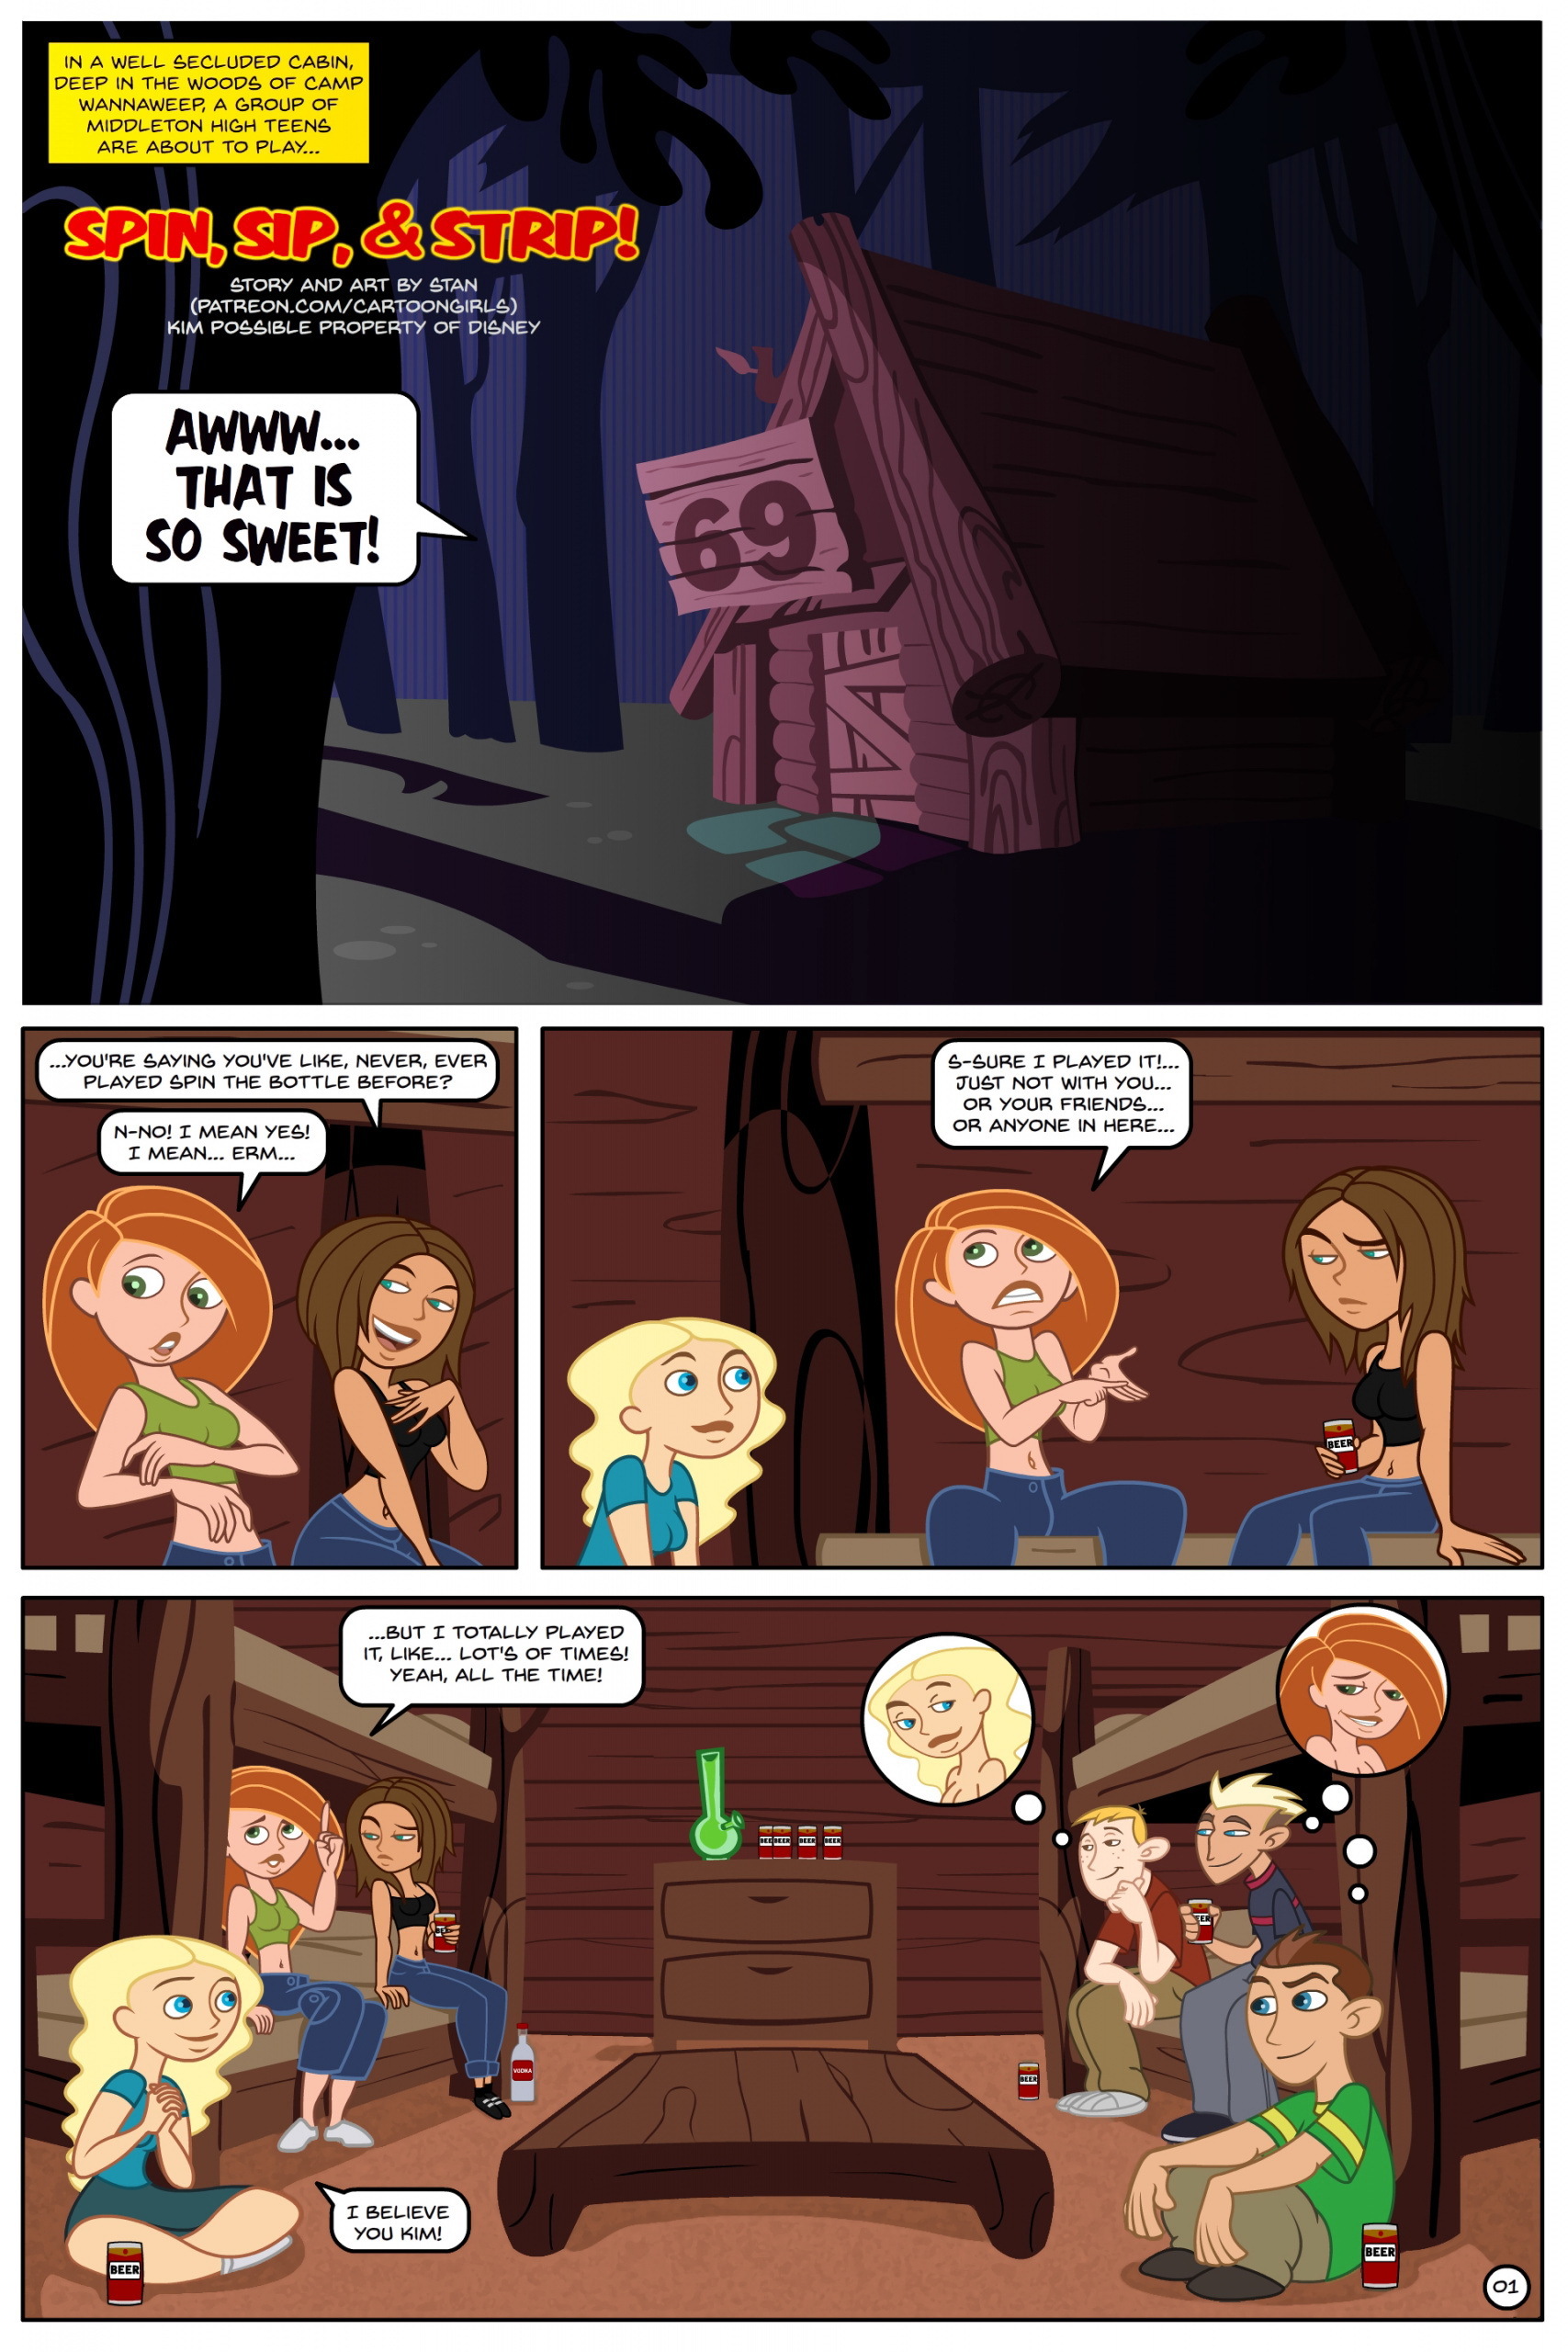 Kim Possible Spin, Sip & Strip! - Page 2